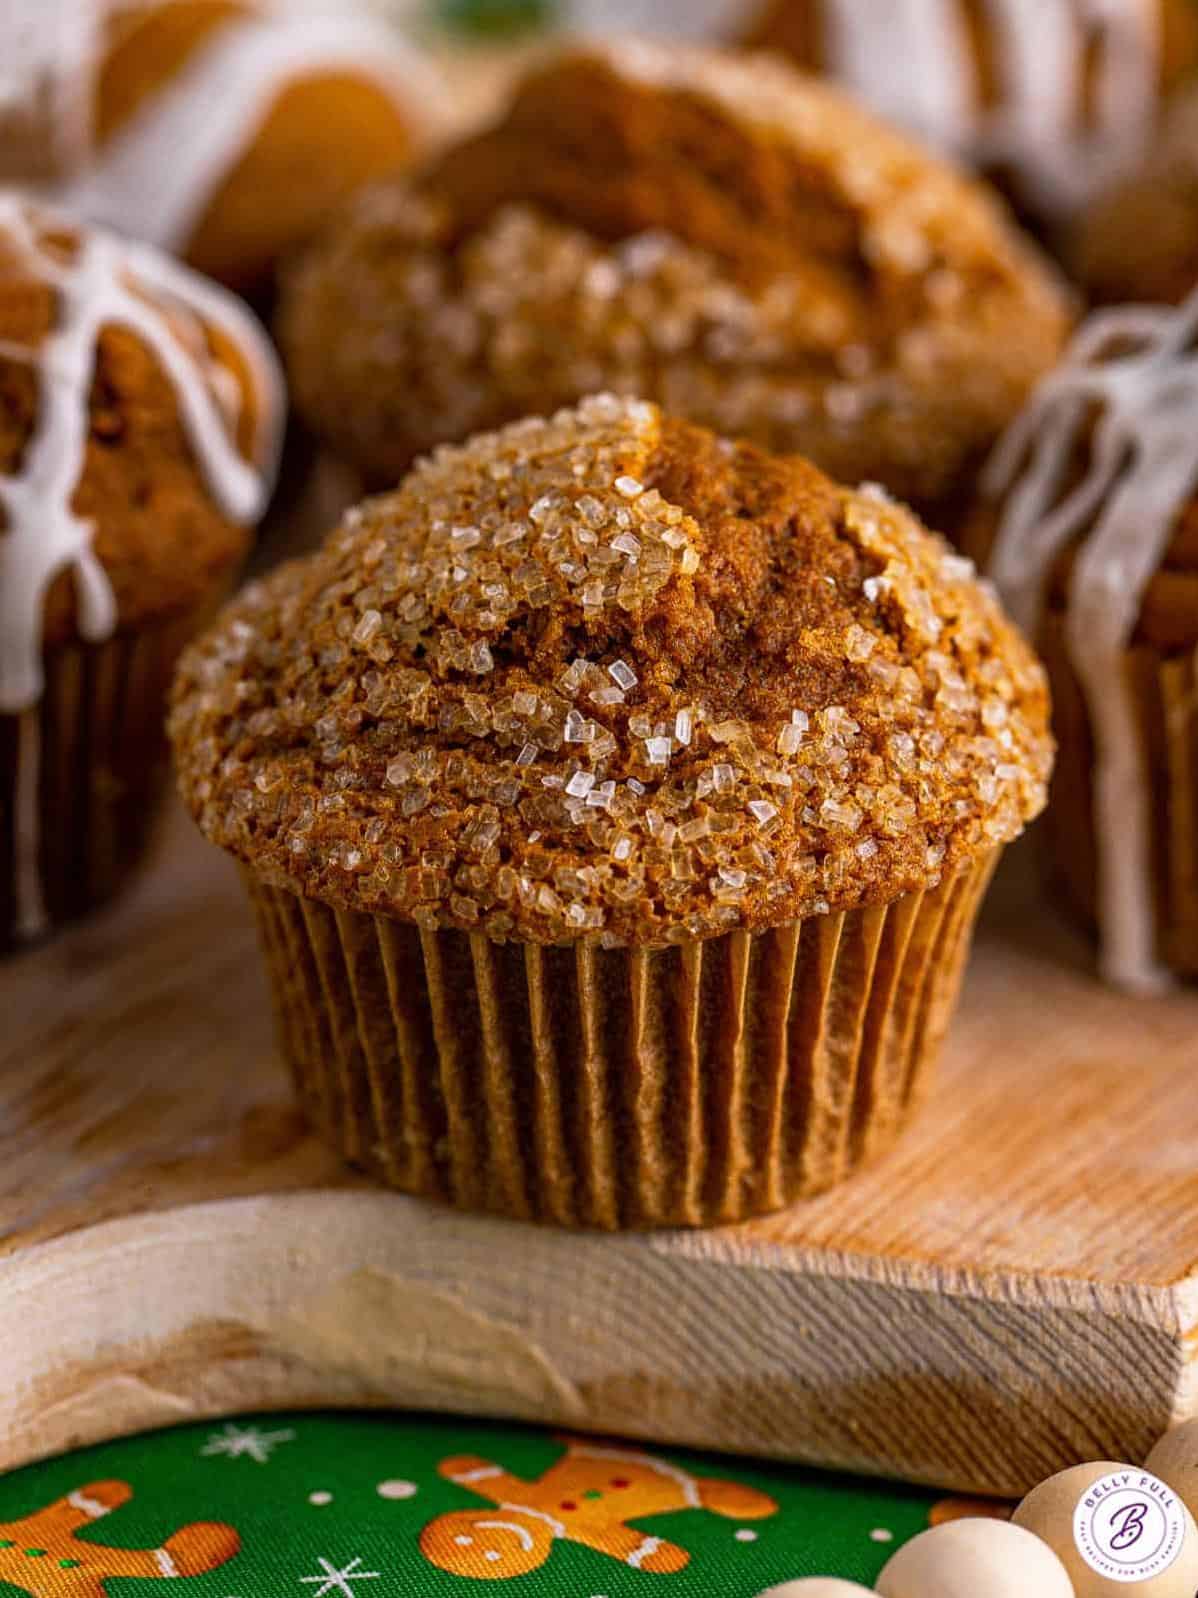 Warm-Up Your Winter with These Spicy Gingerbread Muffins